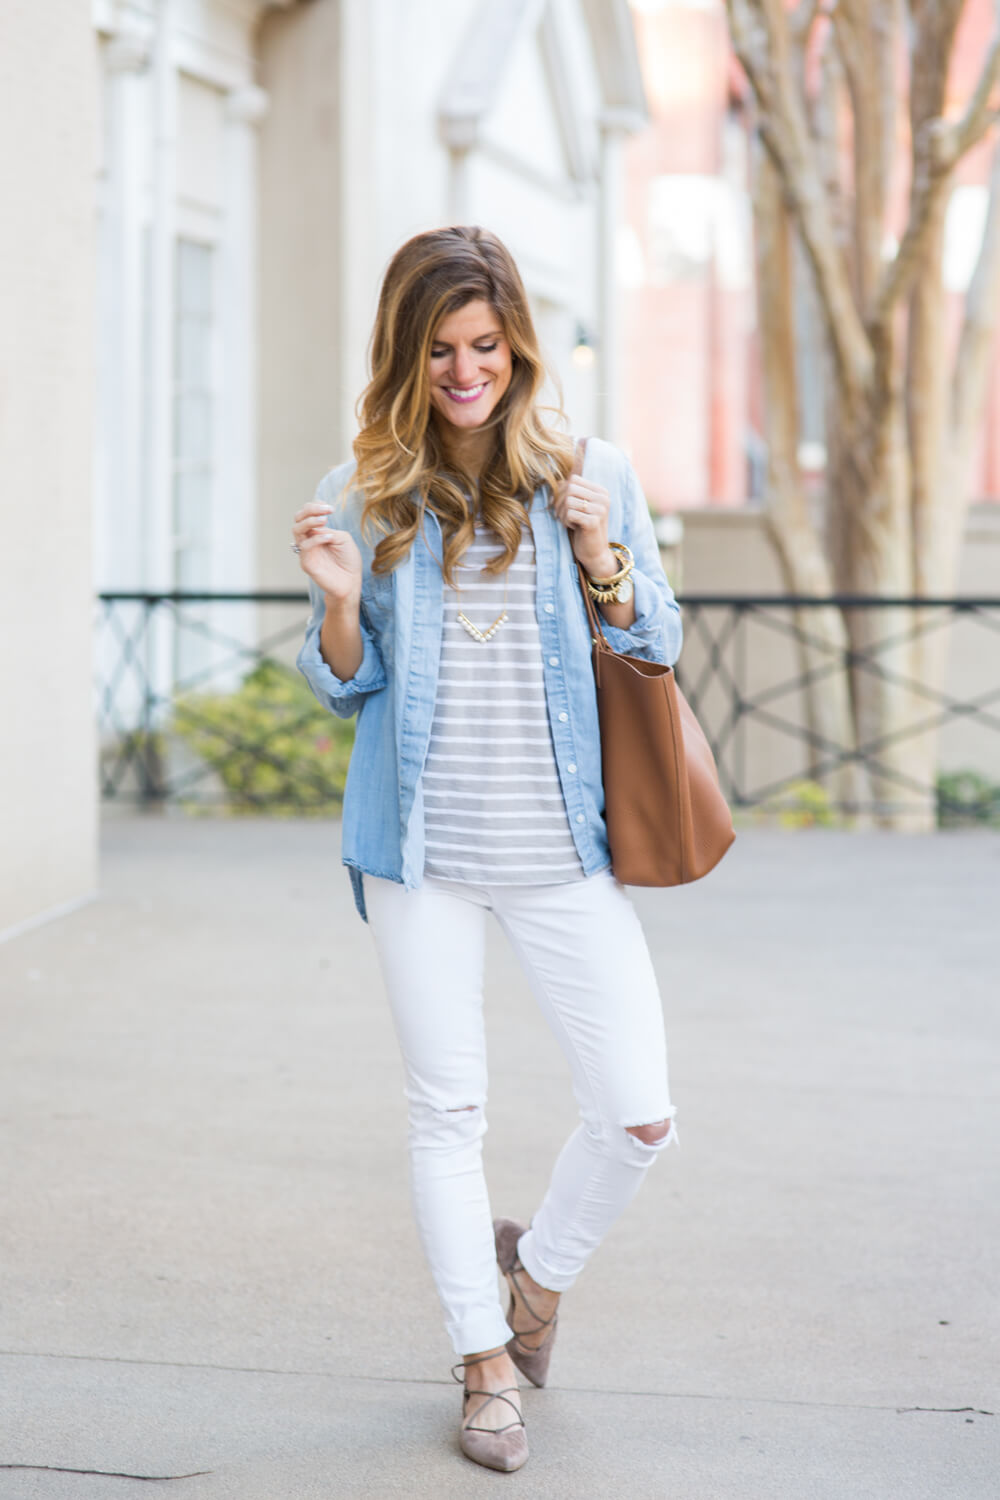 white jeans, neutral stripes, gigi new york tori tote cognac tote, stripes and white jeans, white jeans outfit, stuart weitzman taupe suede pointed toe flats, neutrals outfit, white jeans outfit, transitional style, chambray worn as jacket, chambray shirt outfit, how to wear a chambray shirt, denim shirt with striped tee